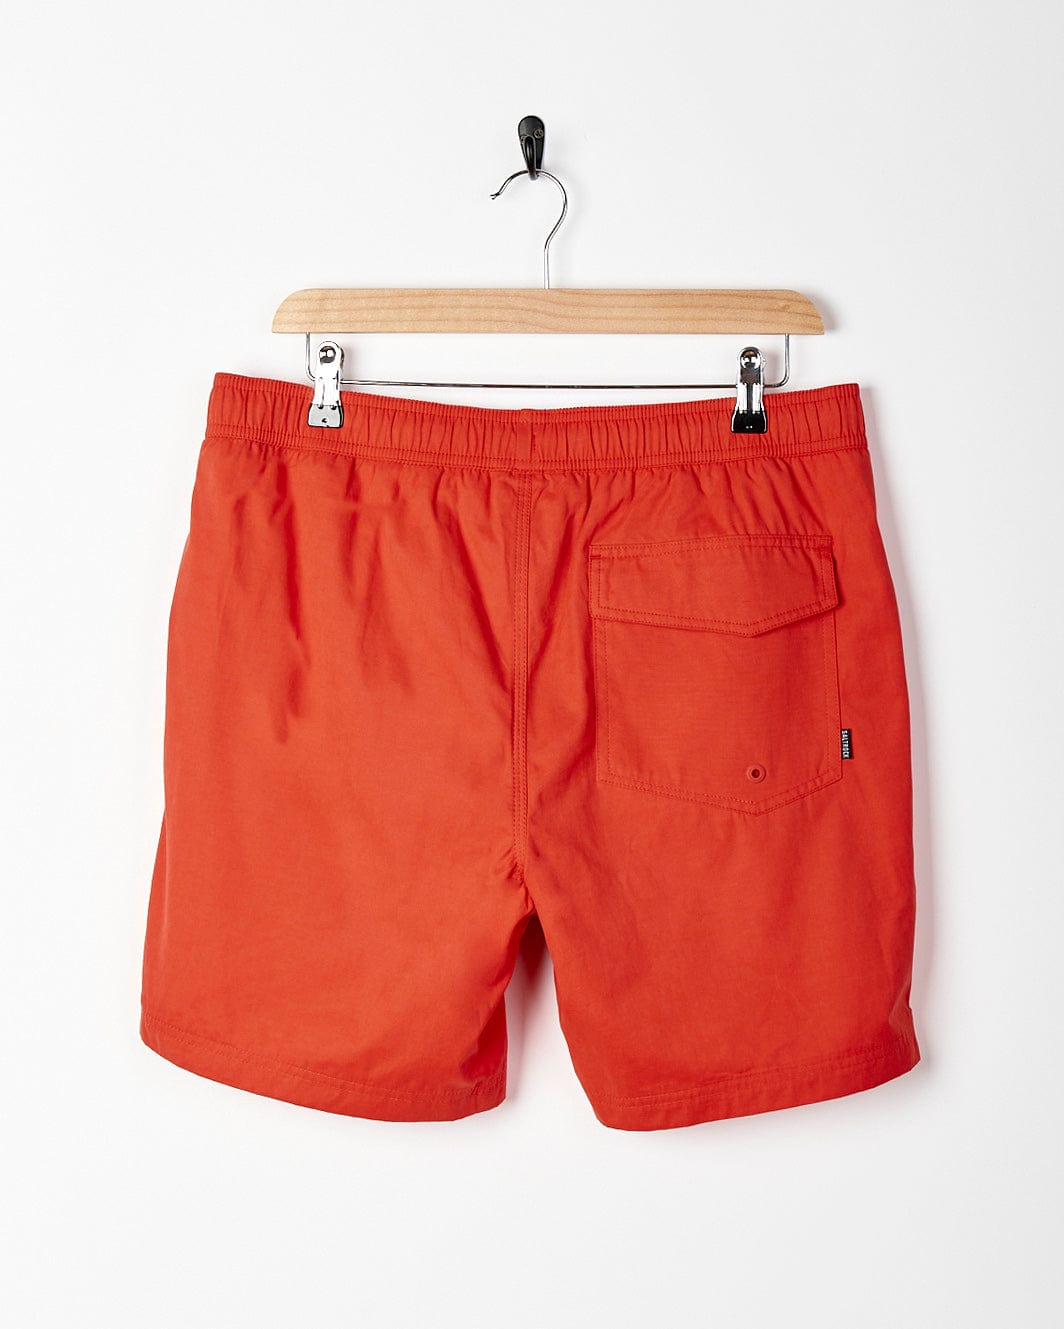 A Saltrock - Lee Mens Sueded Volley Swimshort - Red hanging on a hanger.